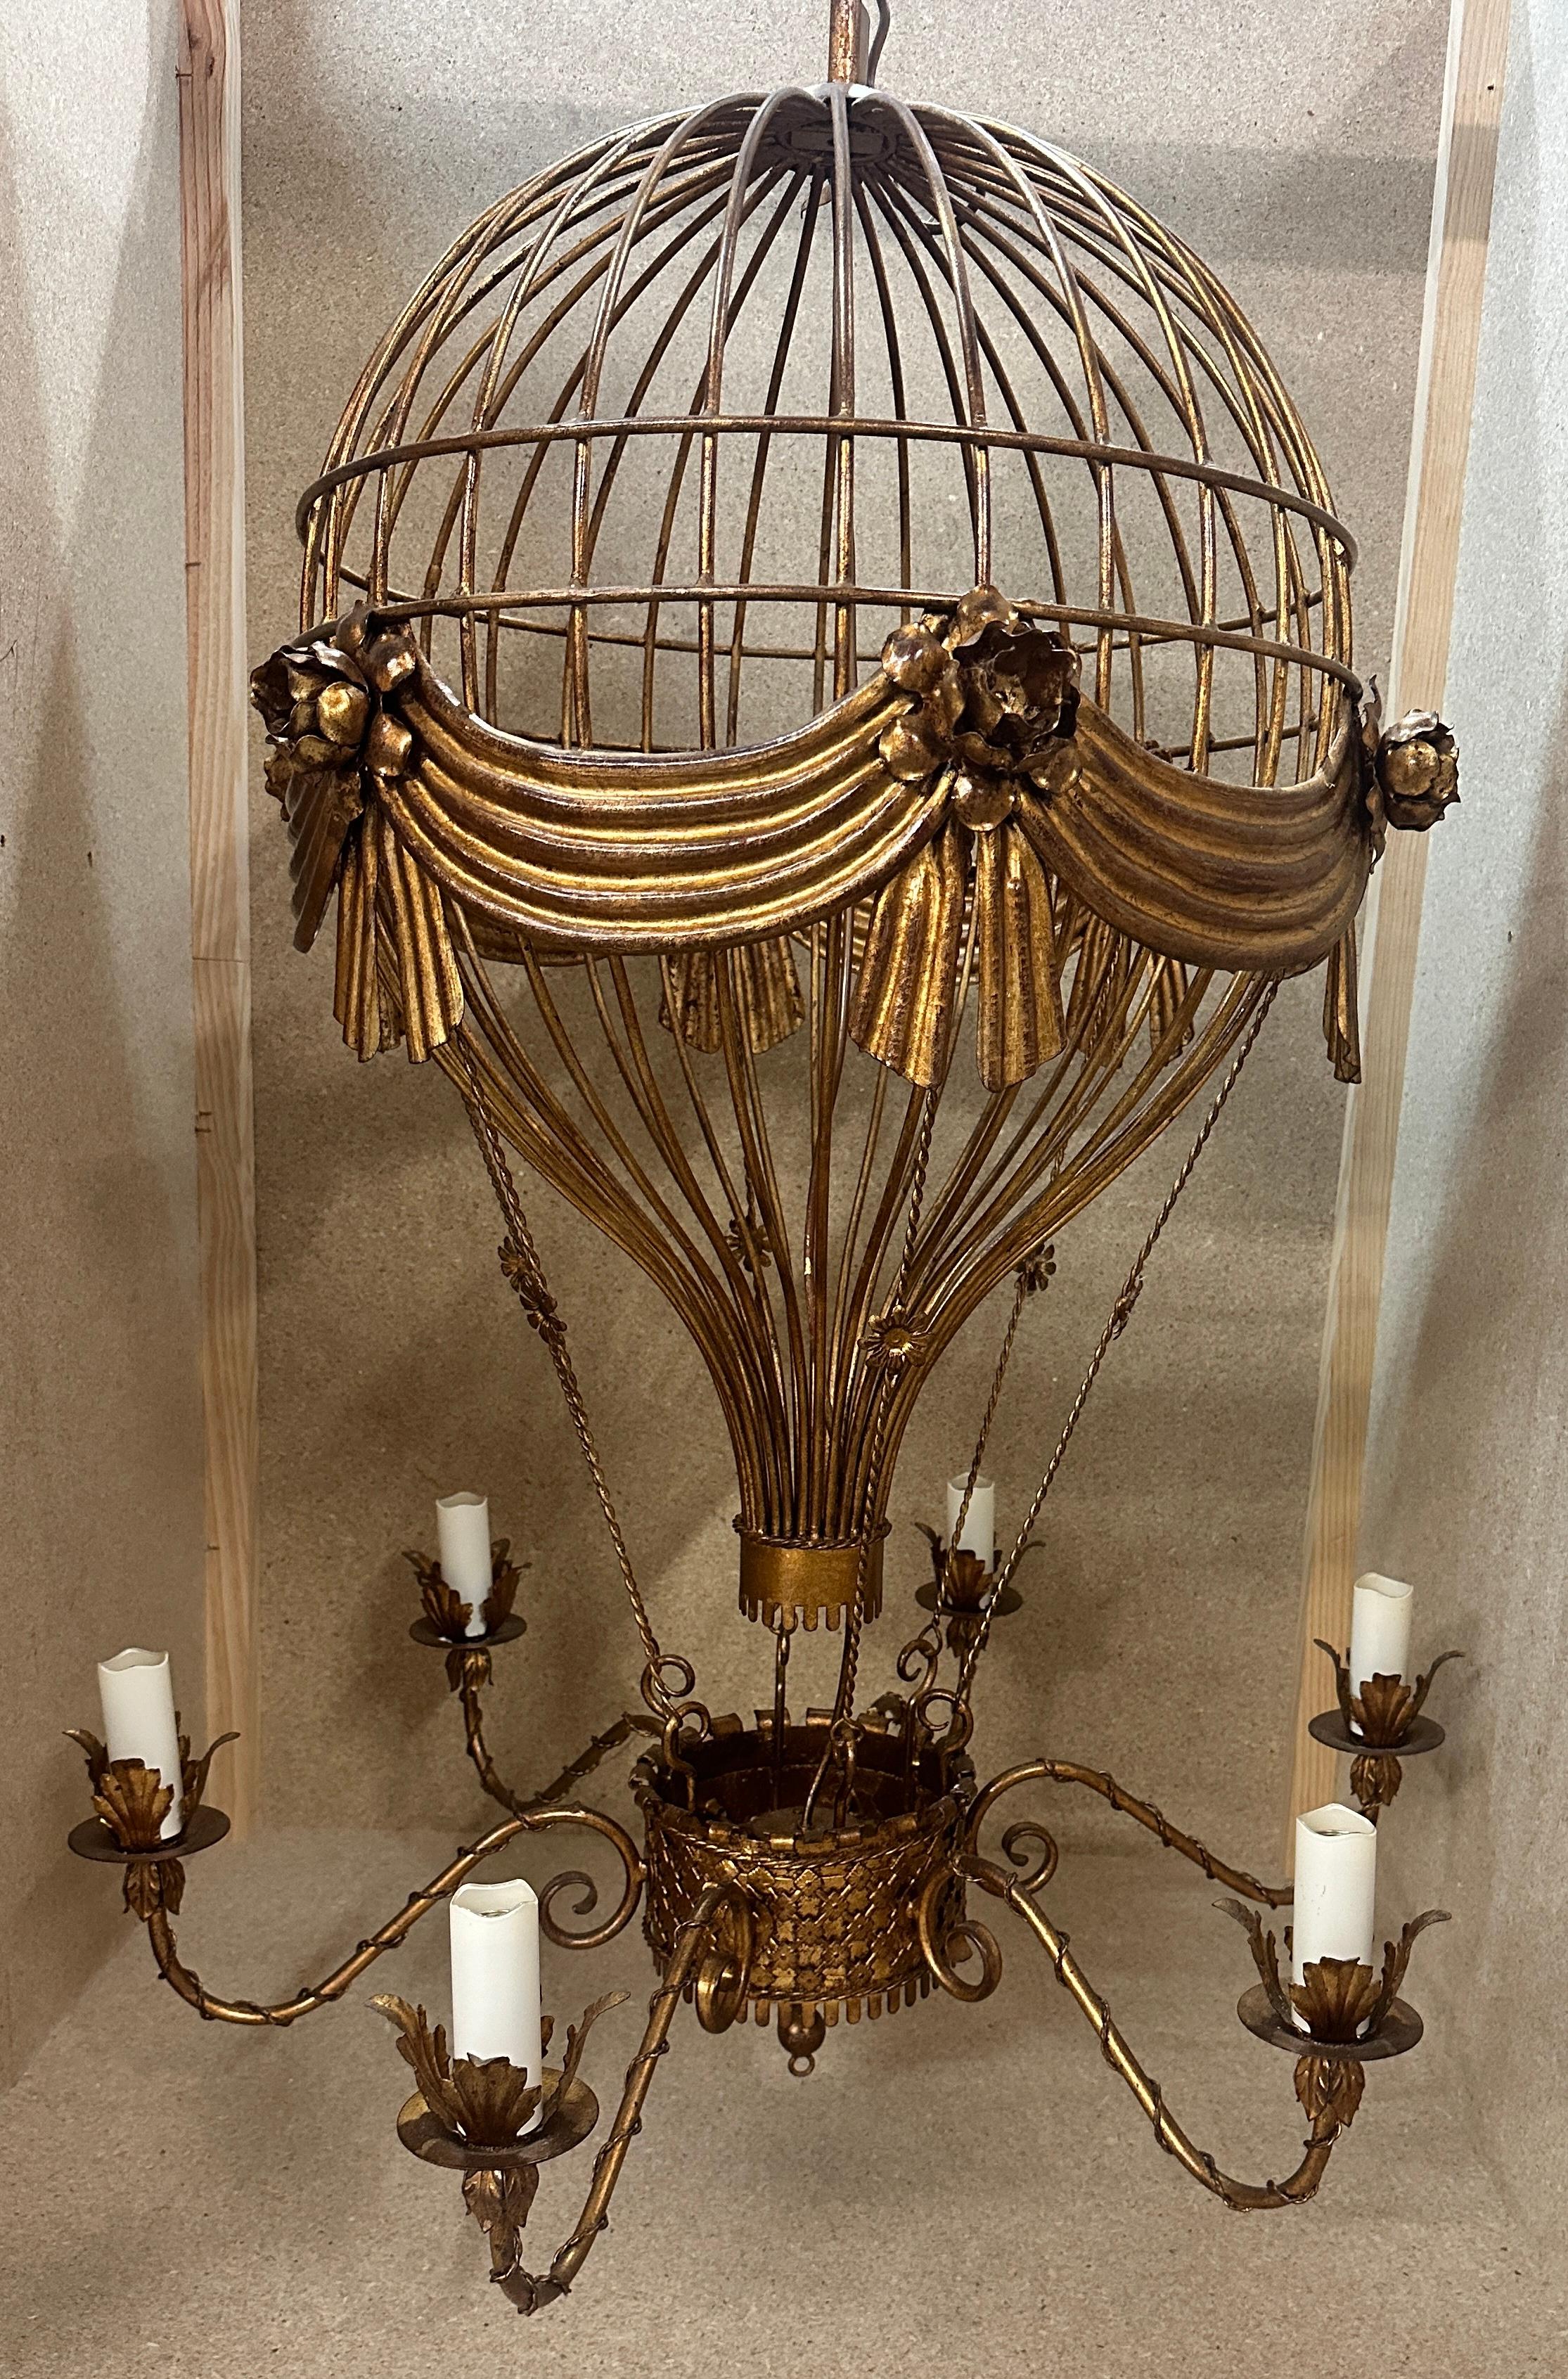 Unusual and whimsical gilt and bronzed tole hot air balloon form chandelier. Balloon adorned with draped swags and roses. Basket below suspended in realistic form from wires as ropes. Six arms/lights projecting from basket.